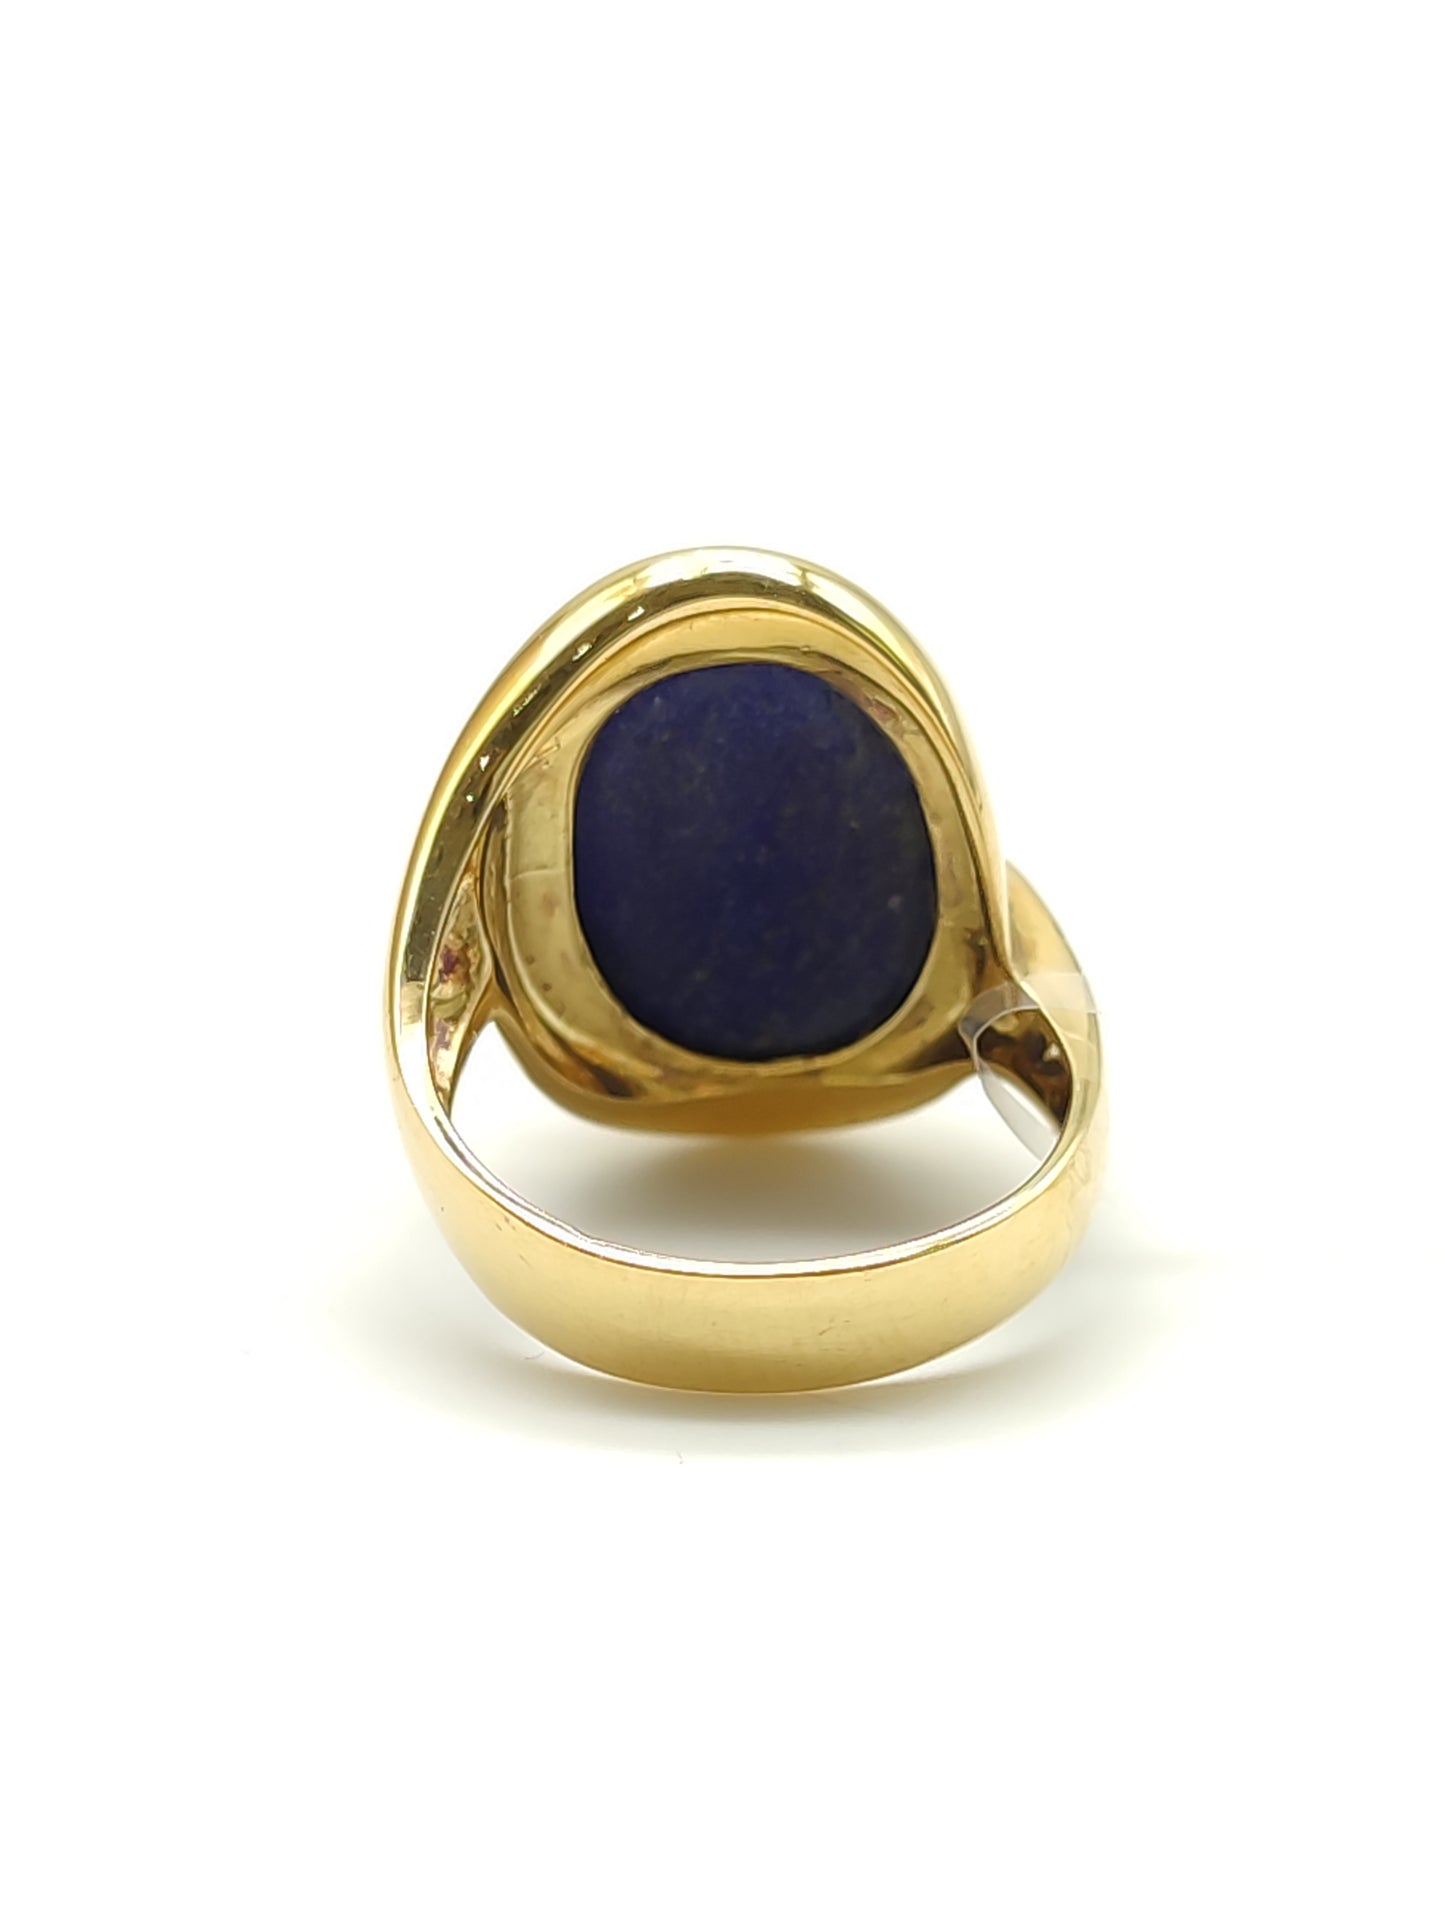 Gold ring with large oval lapis lazuli